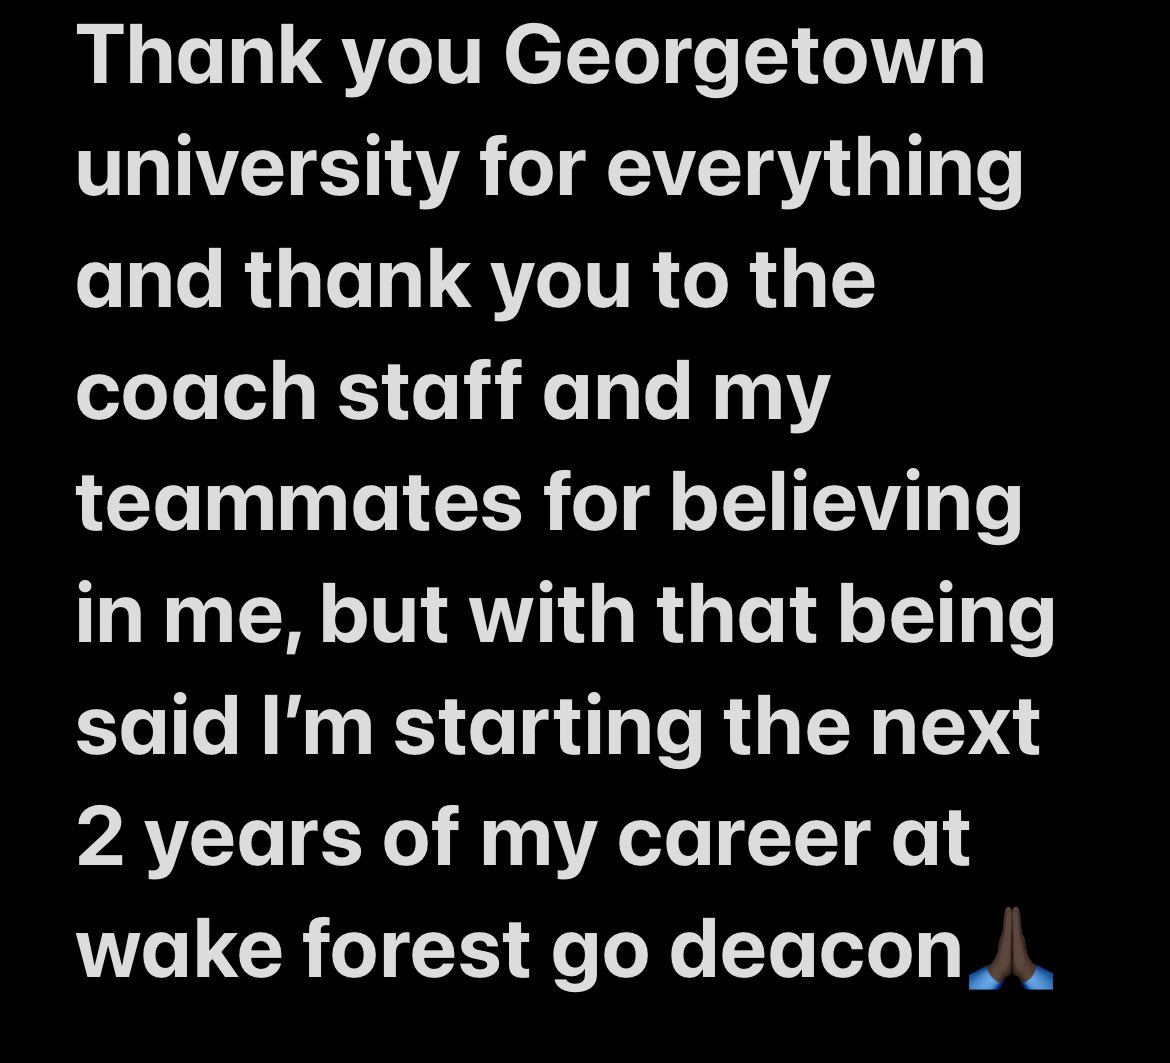 Go Deacons thank you for all who have supported me through this process.